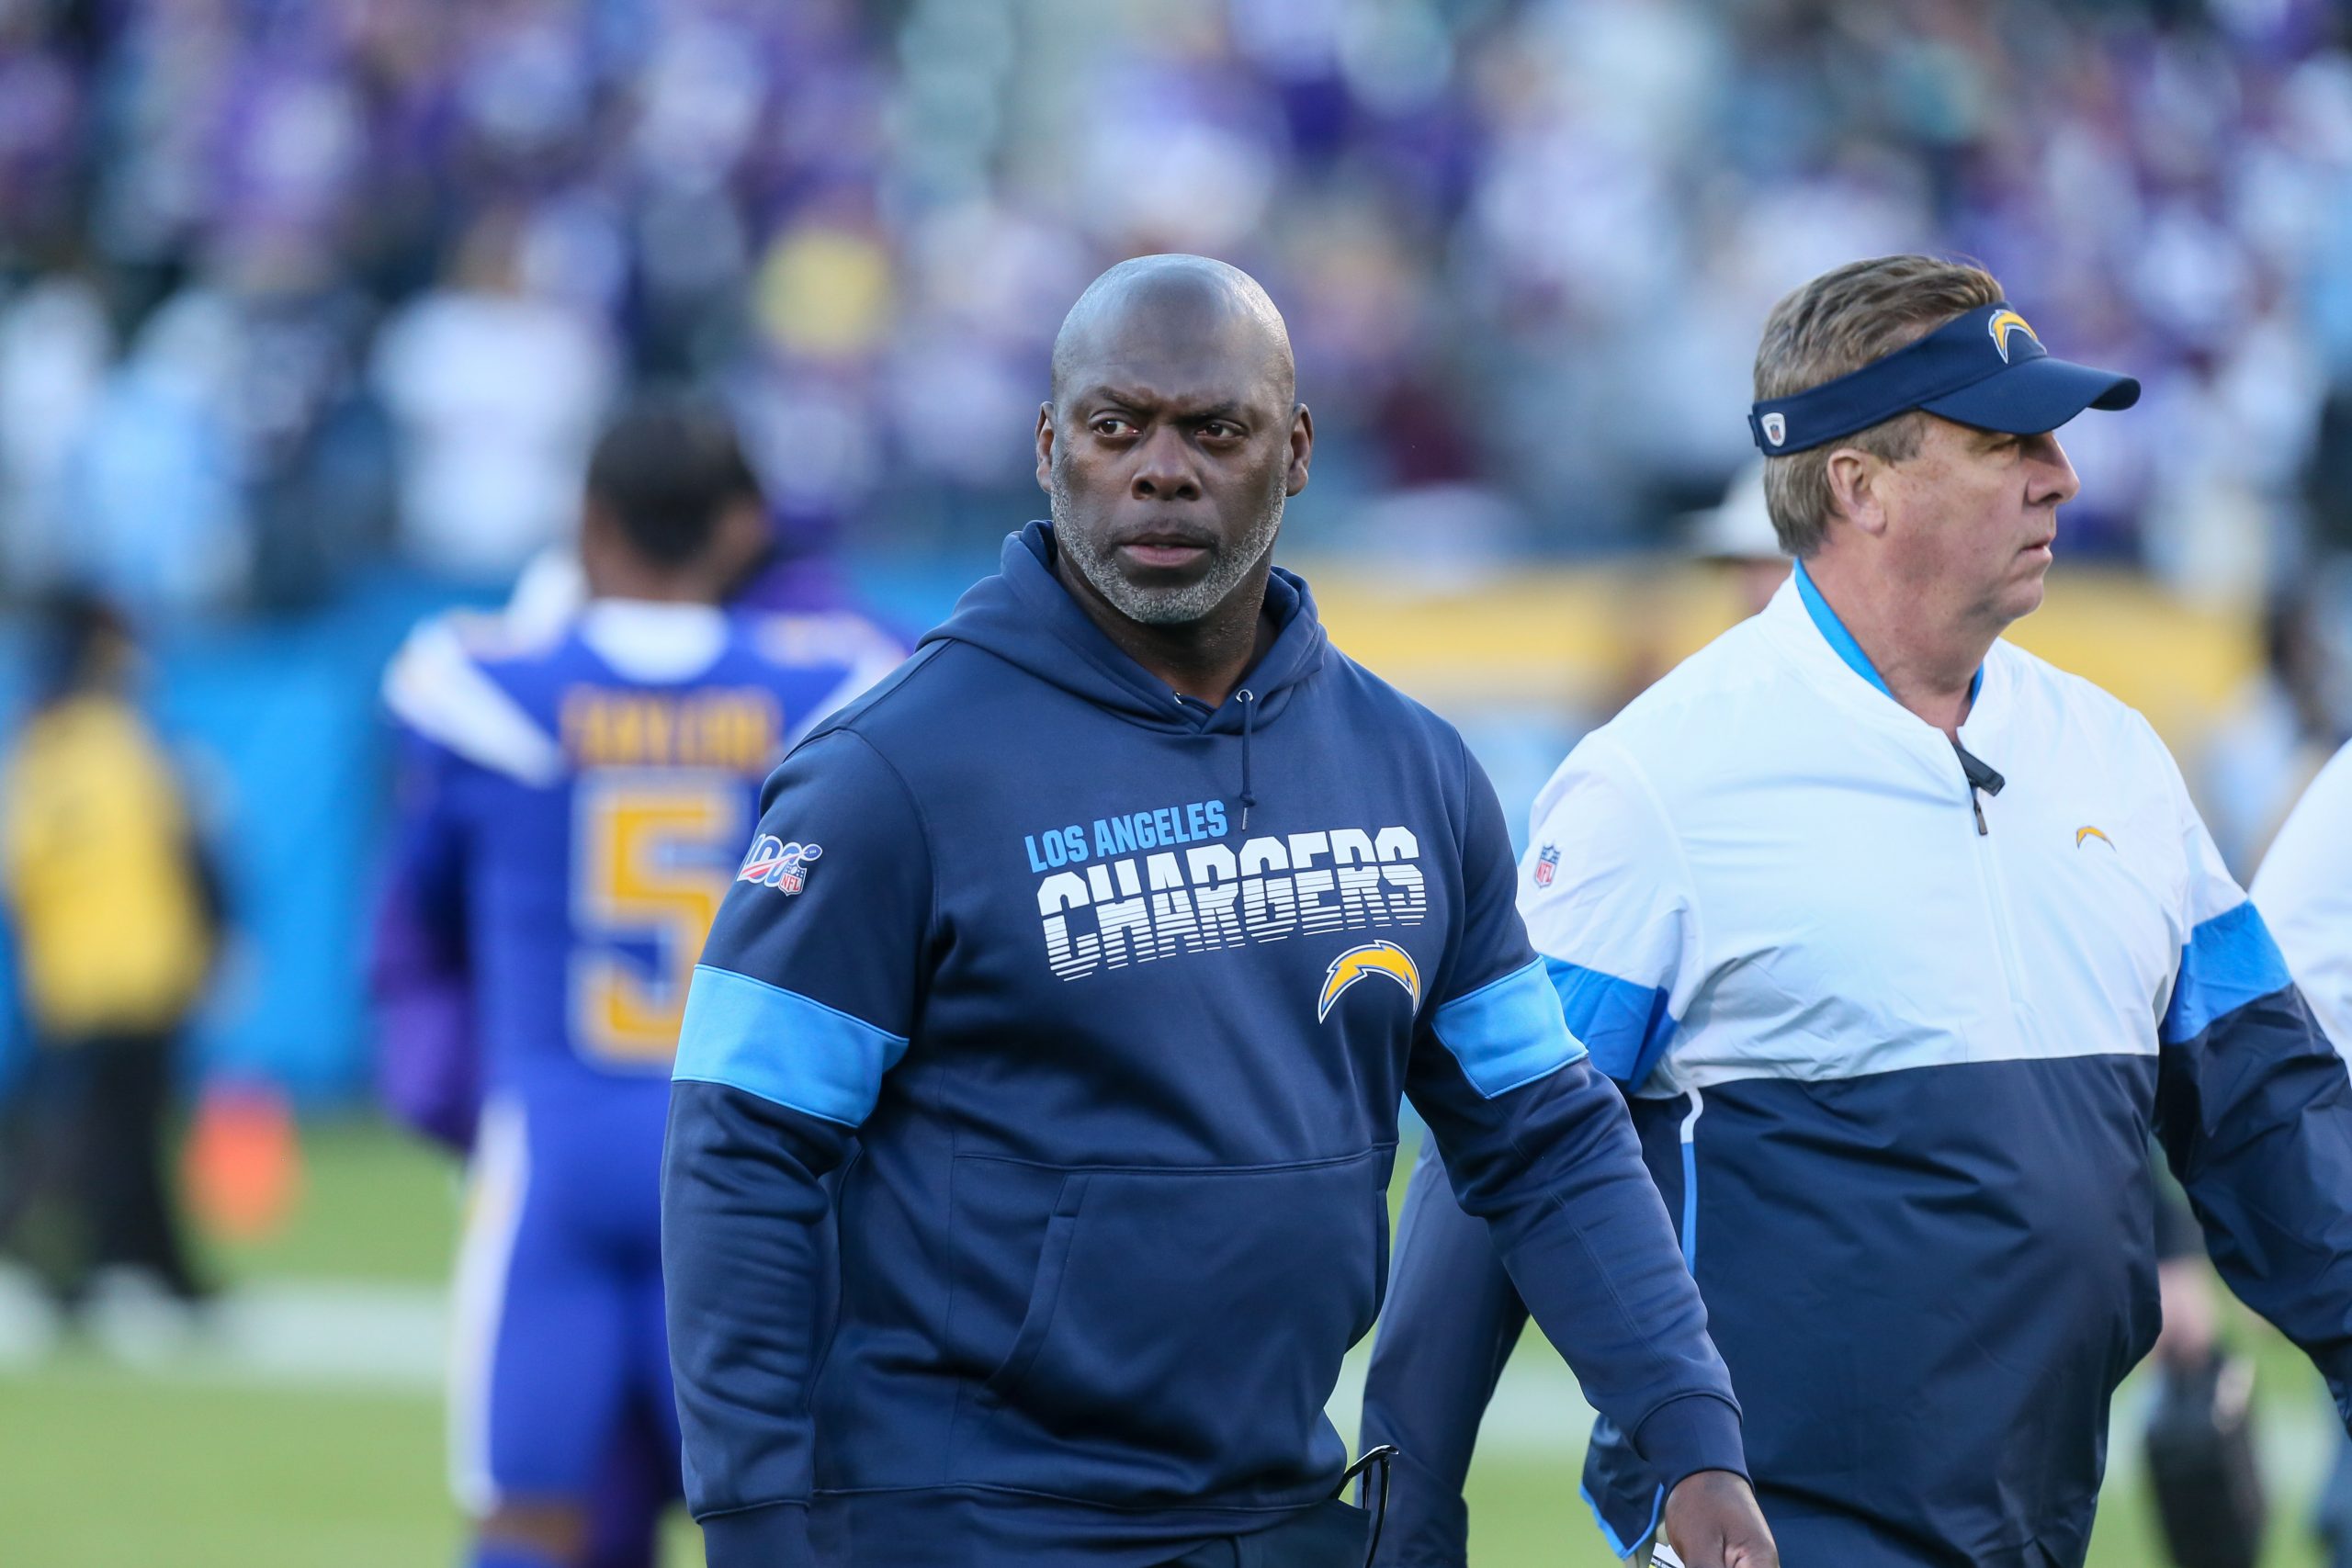 LOS ANGELES, CA - DECEMBER 15: Los Angeles Chargers head coach Anthony Lynn walks off the field during the Minnesota Vik